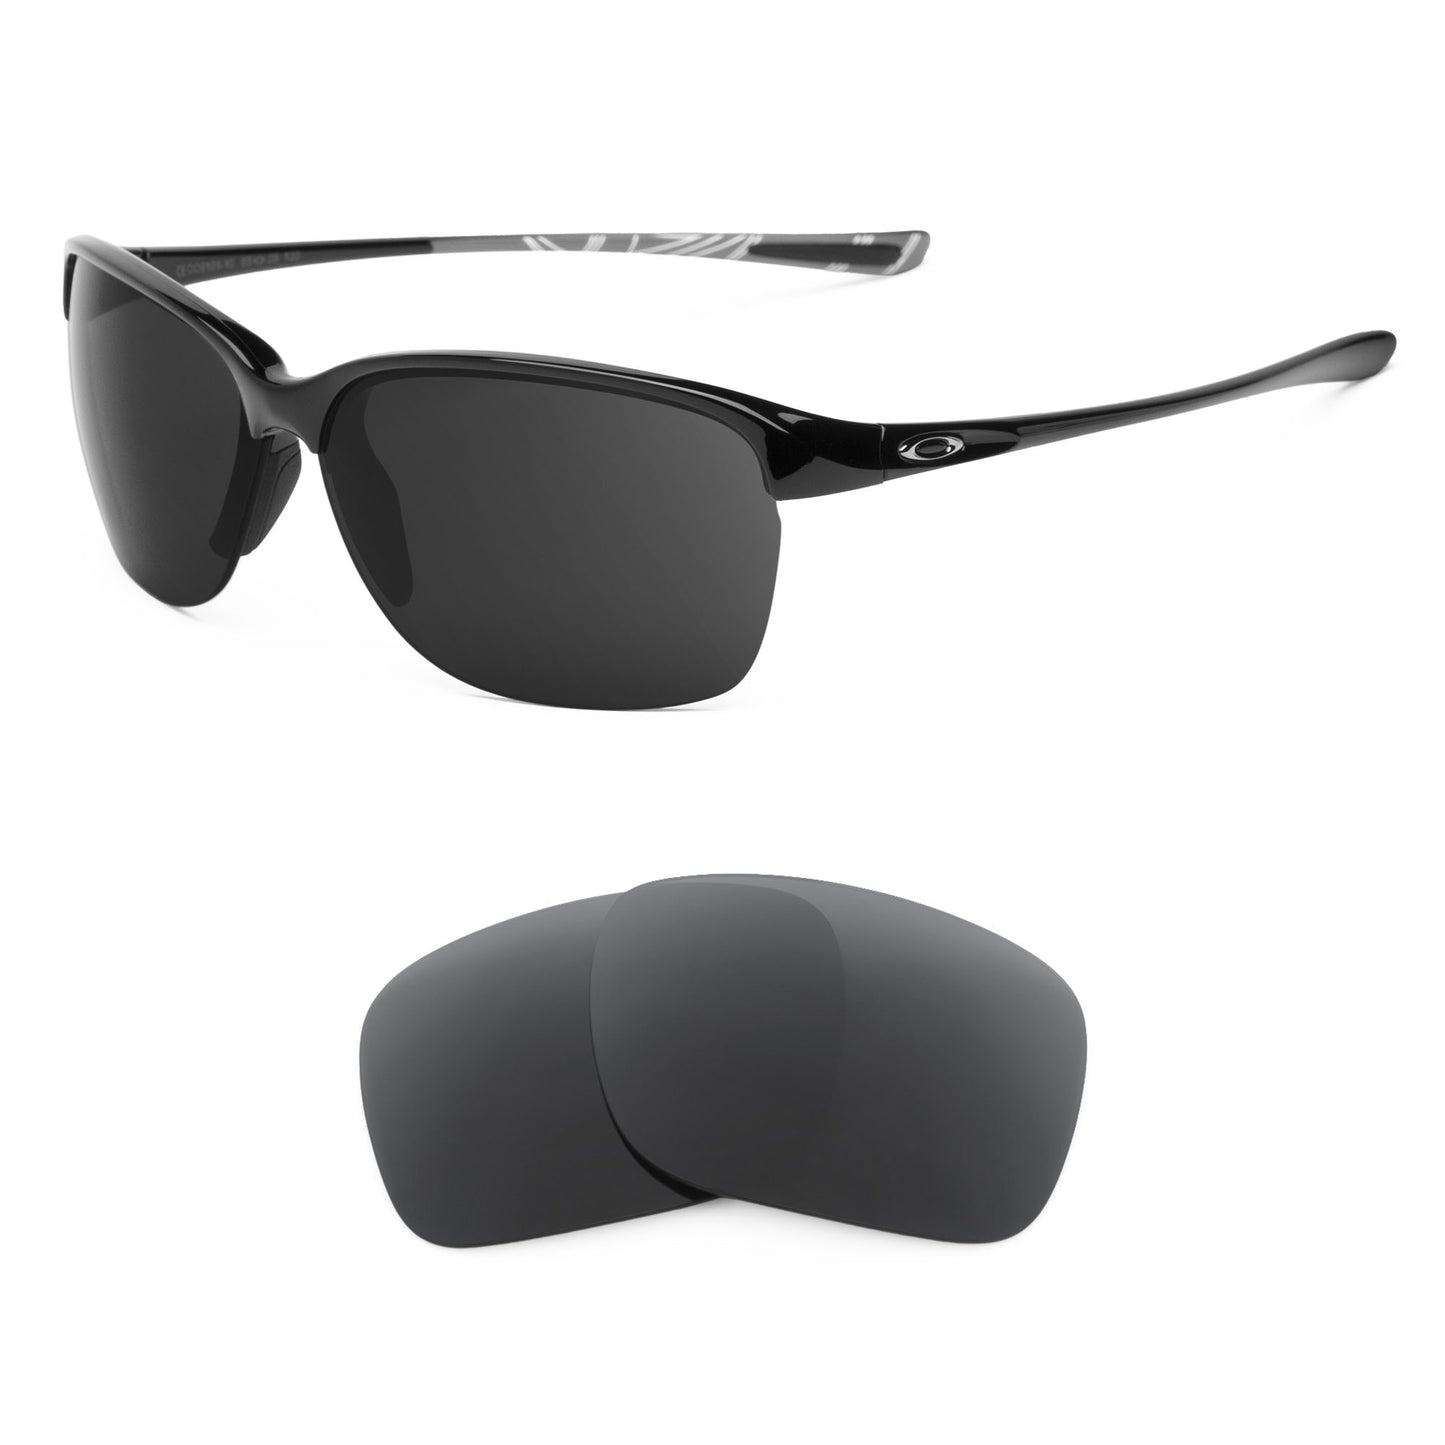 Oakley Unstoppable sunglasses with replacement lenses